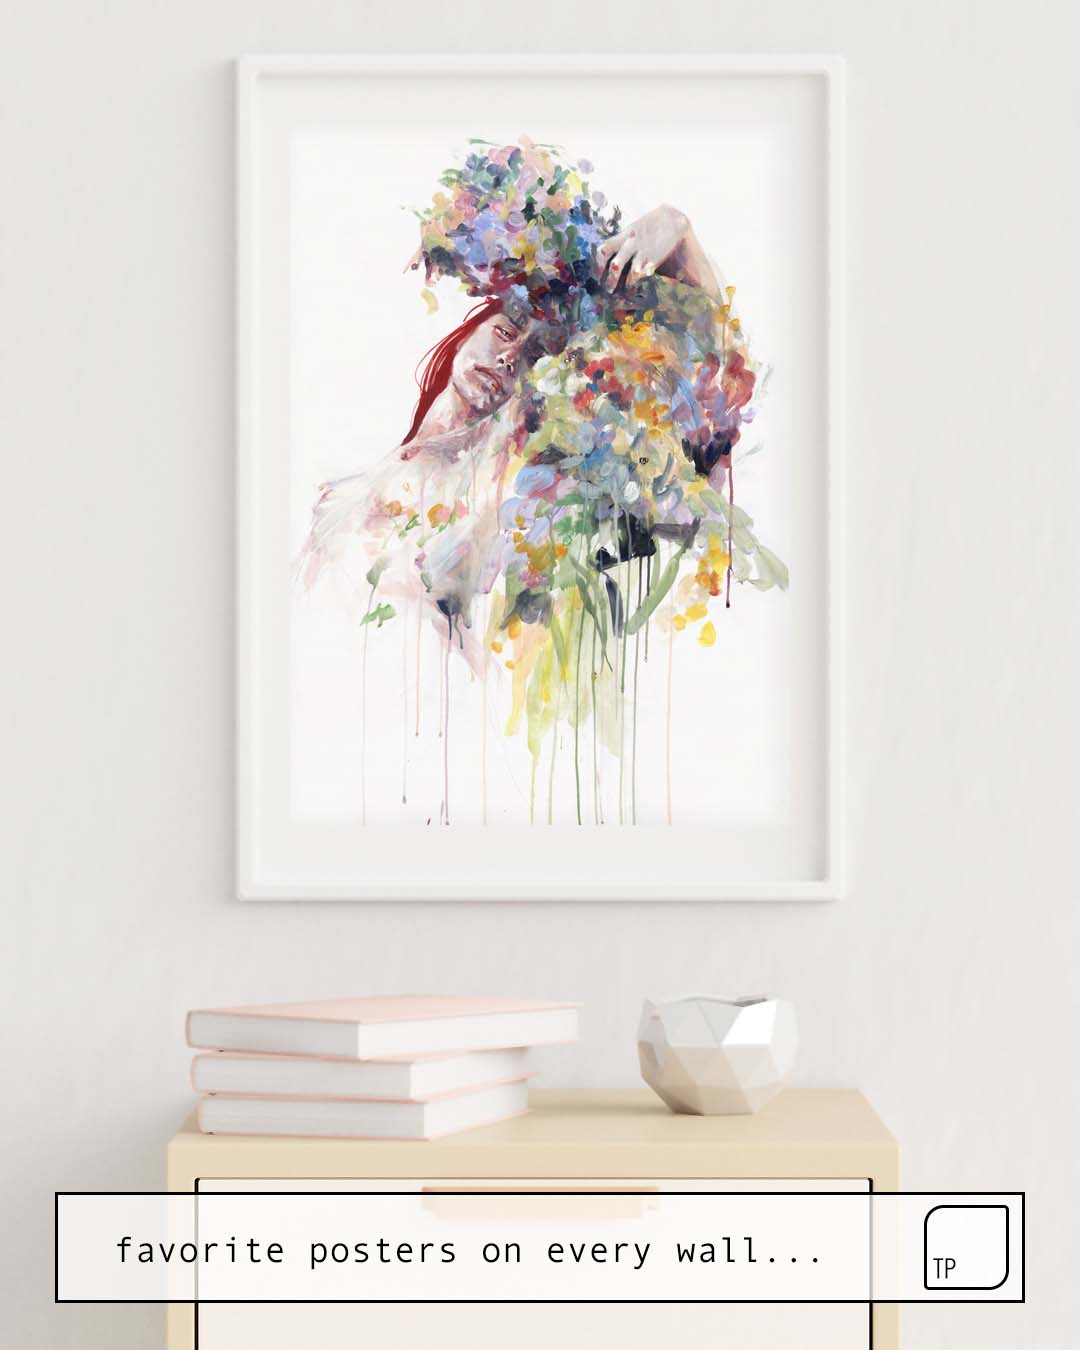 The photo shows an example of furnishing with the motif SCENTLESS FLOWERS by Agnes Cecile as mural